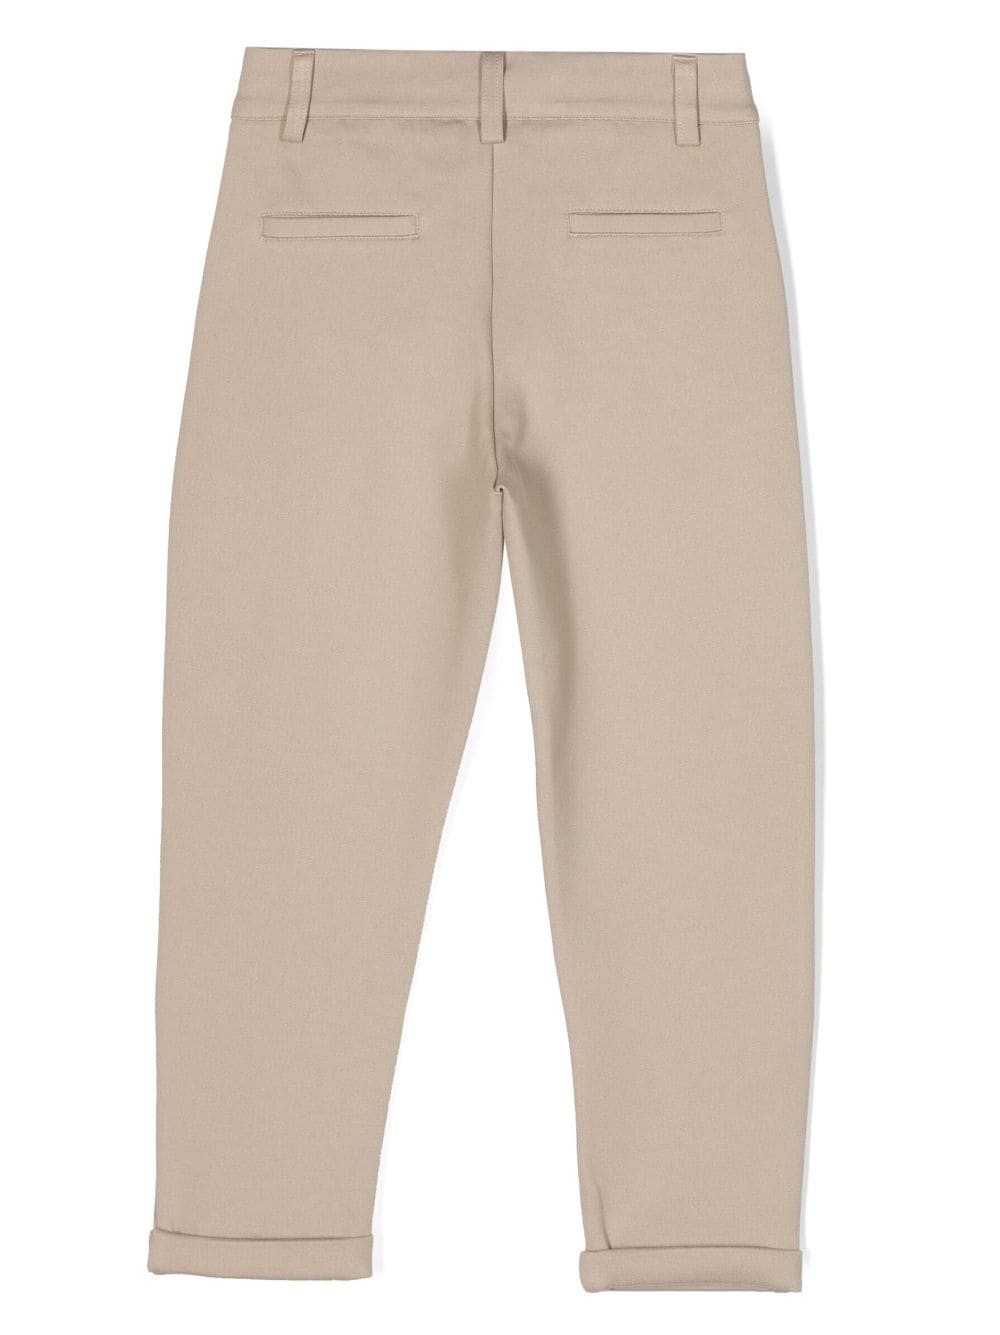 Chinos with embroidery